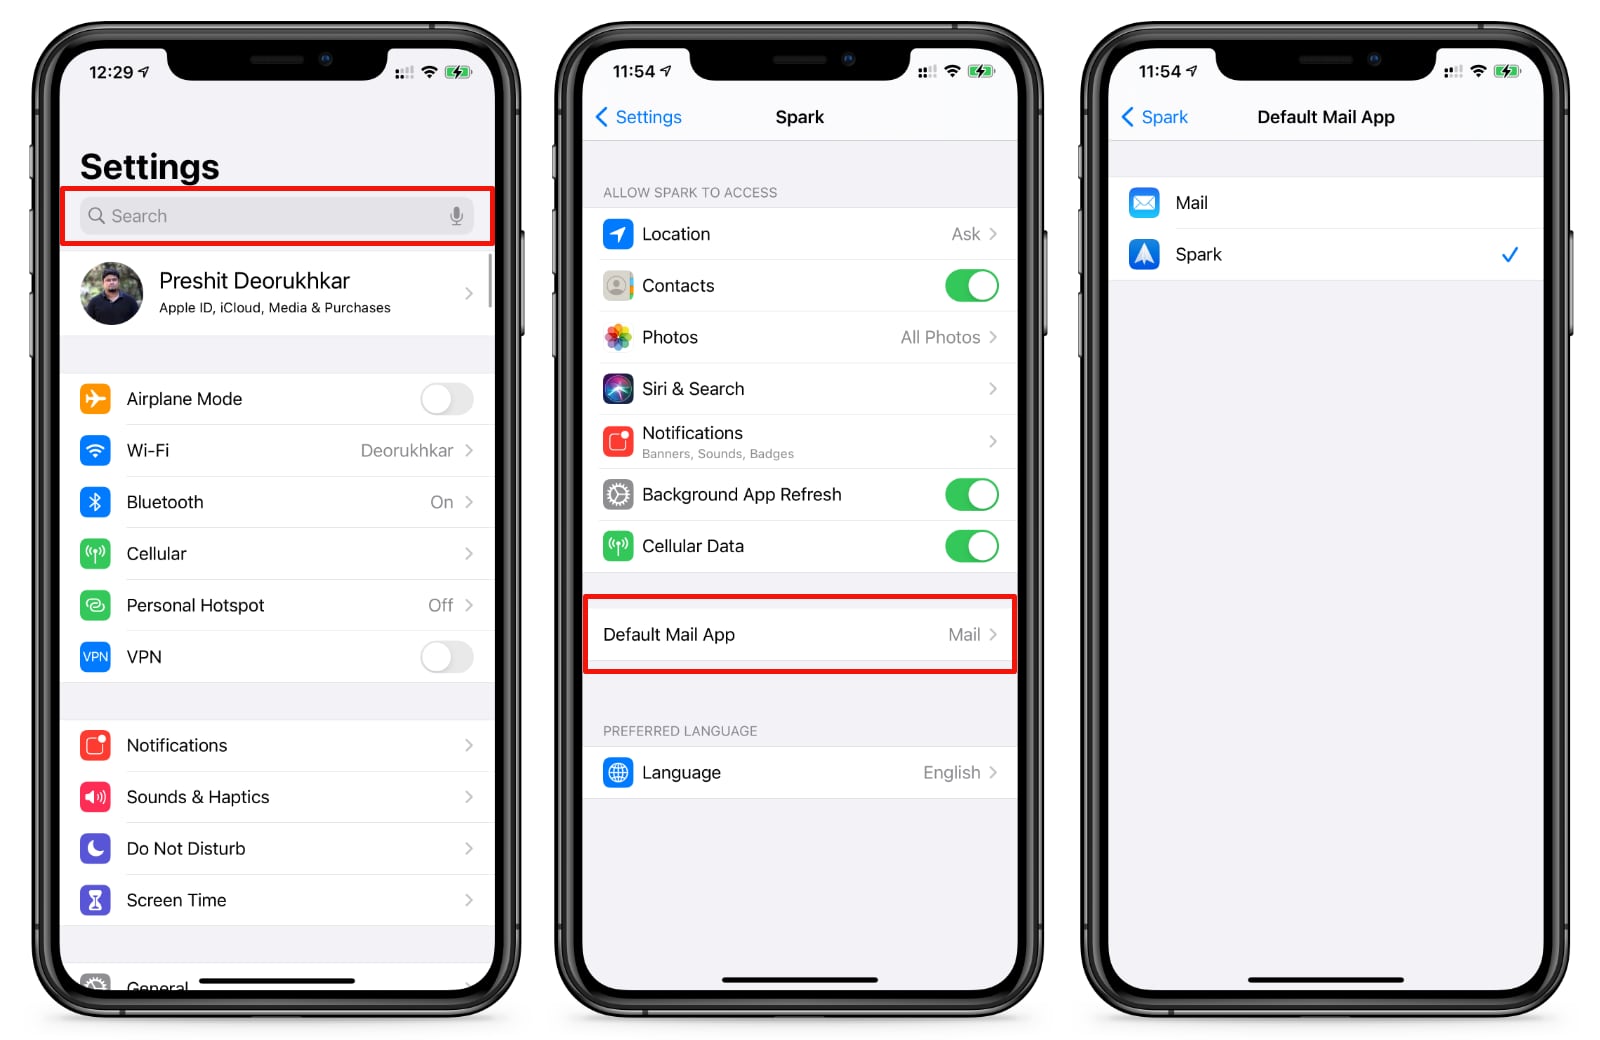 email-configuration-setting-up-email-on-your-iphone-11